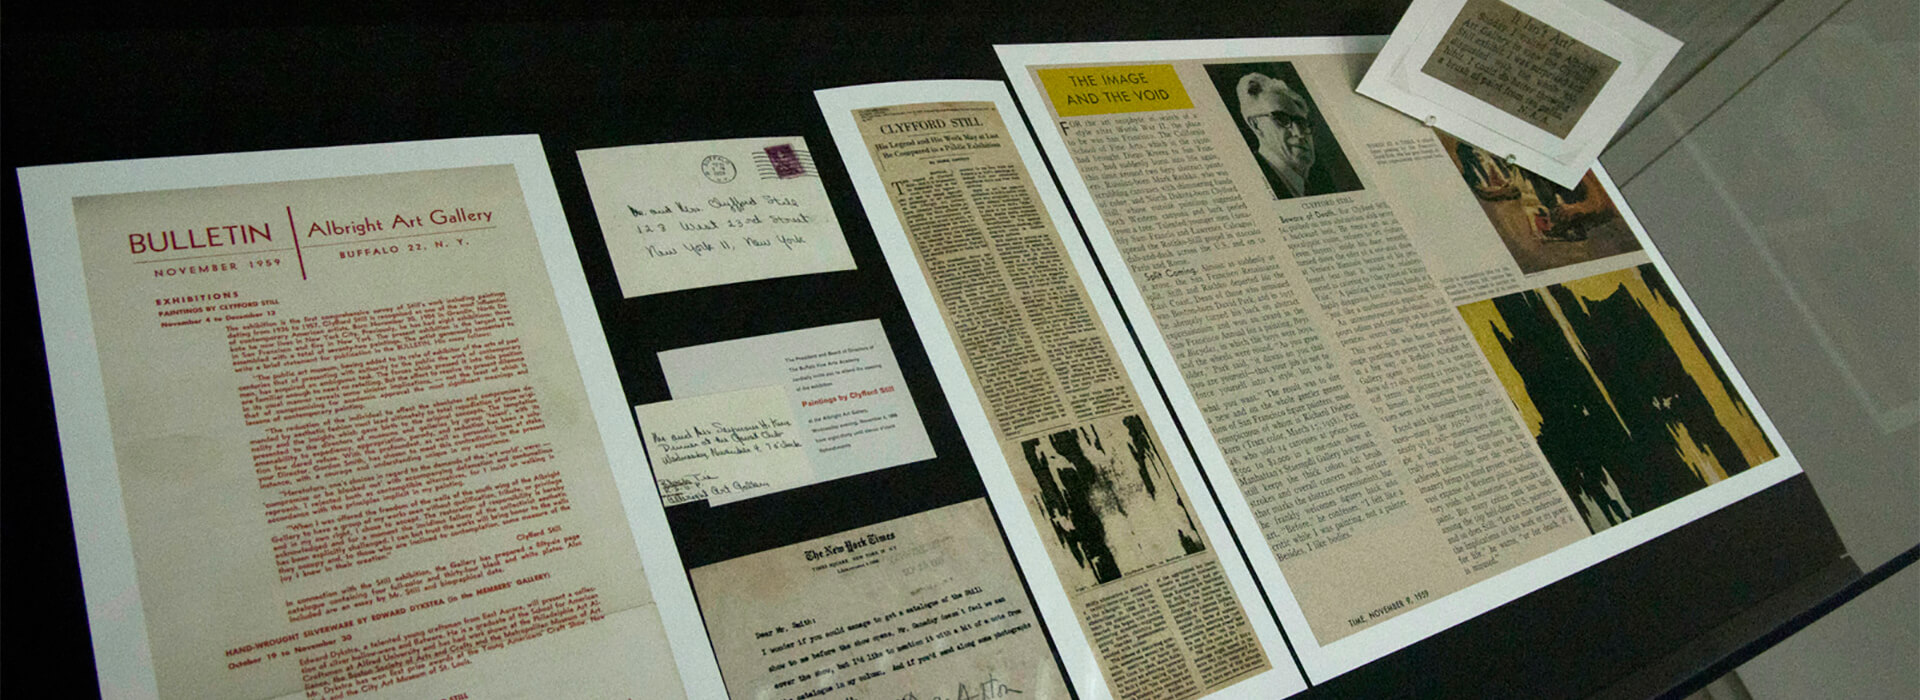 Photo of clippings in a display case in 1959 exhibition